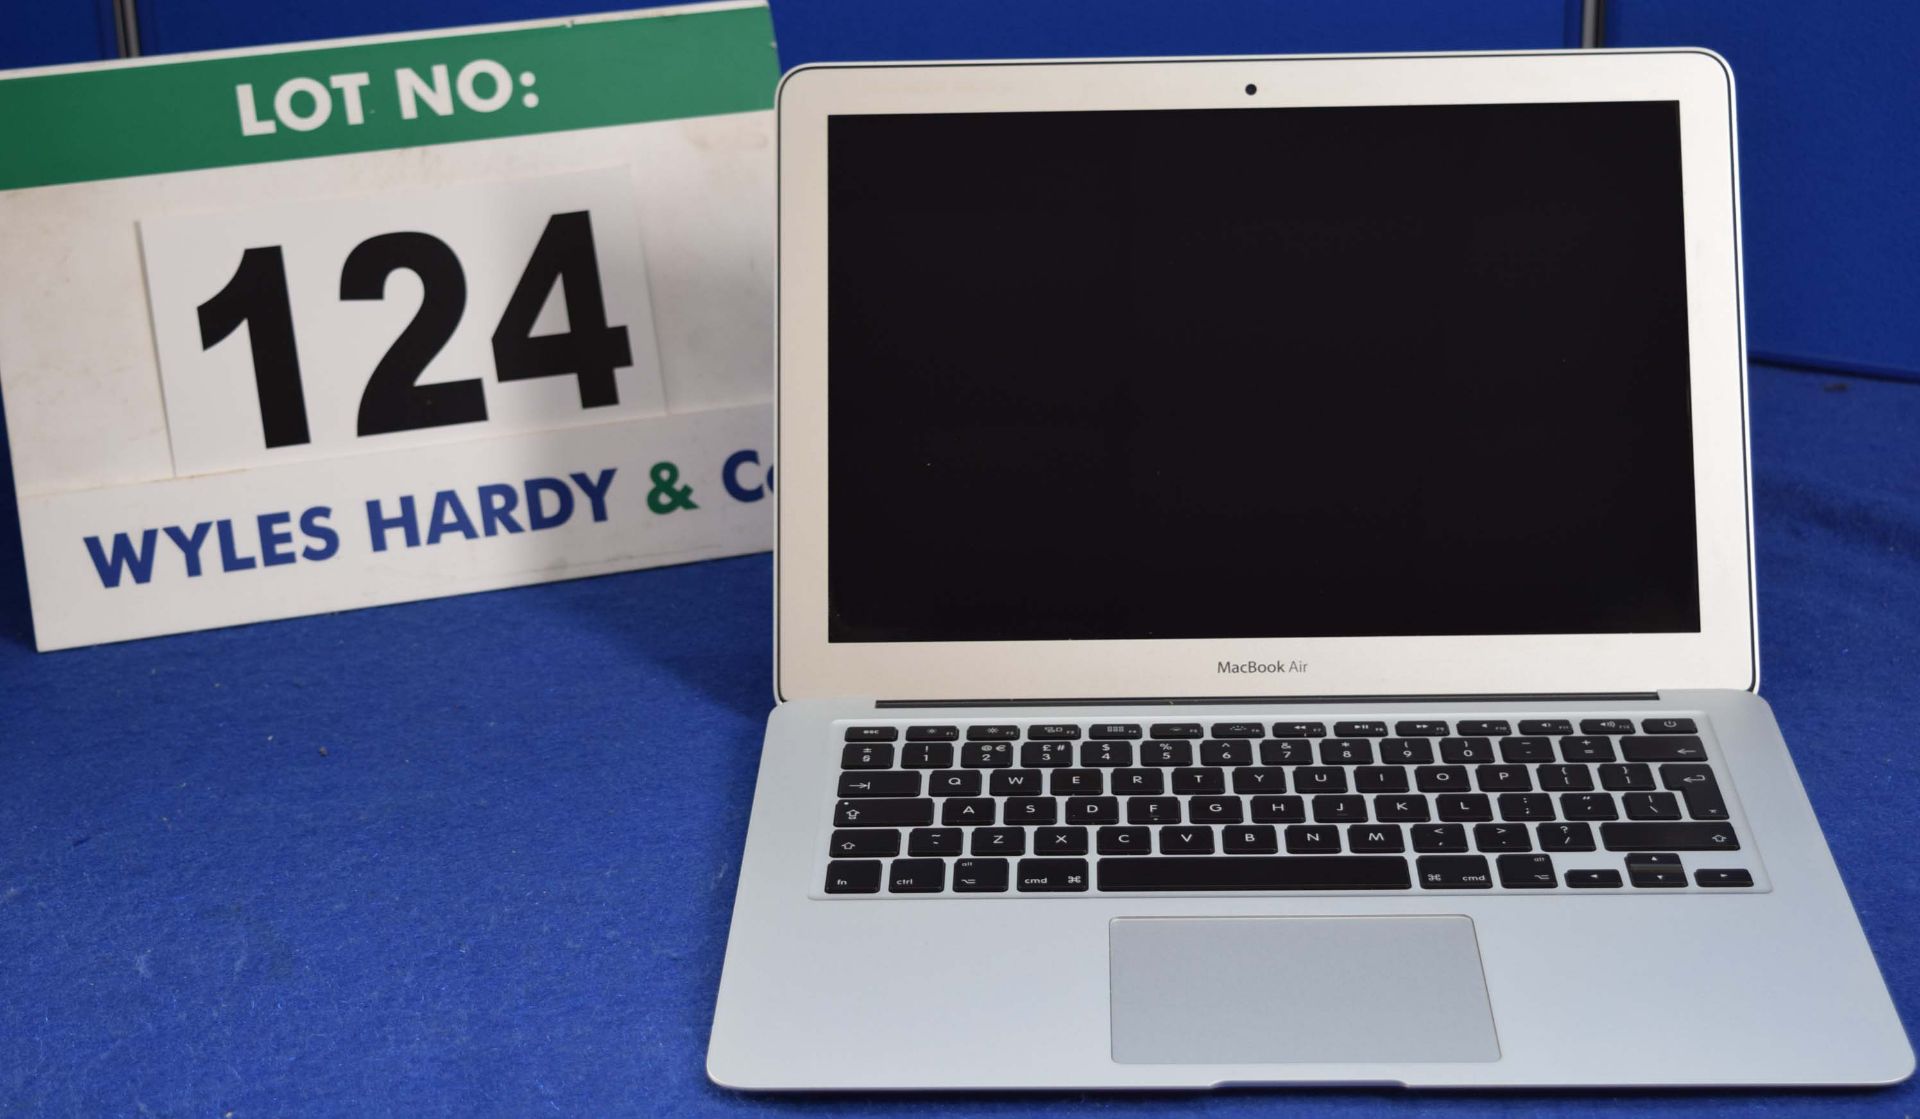 APPLE MacBook Air 5.1 2 13" Intel Core i5 Dual Core 1.8GHZ Laptop Computer with Fitted 128GB Hard